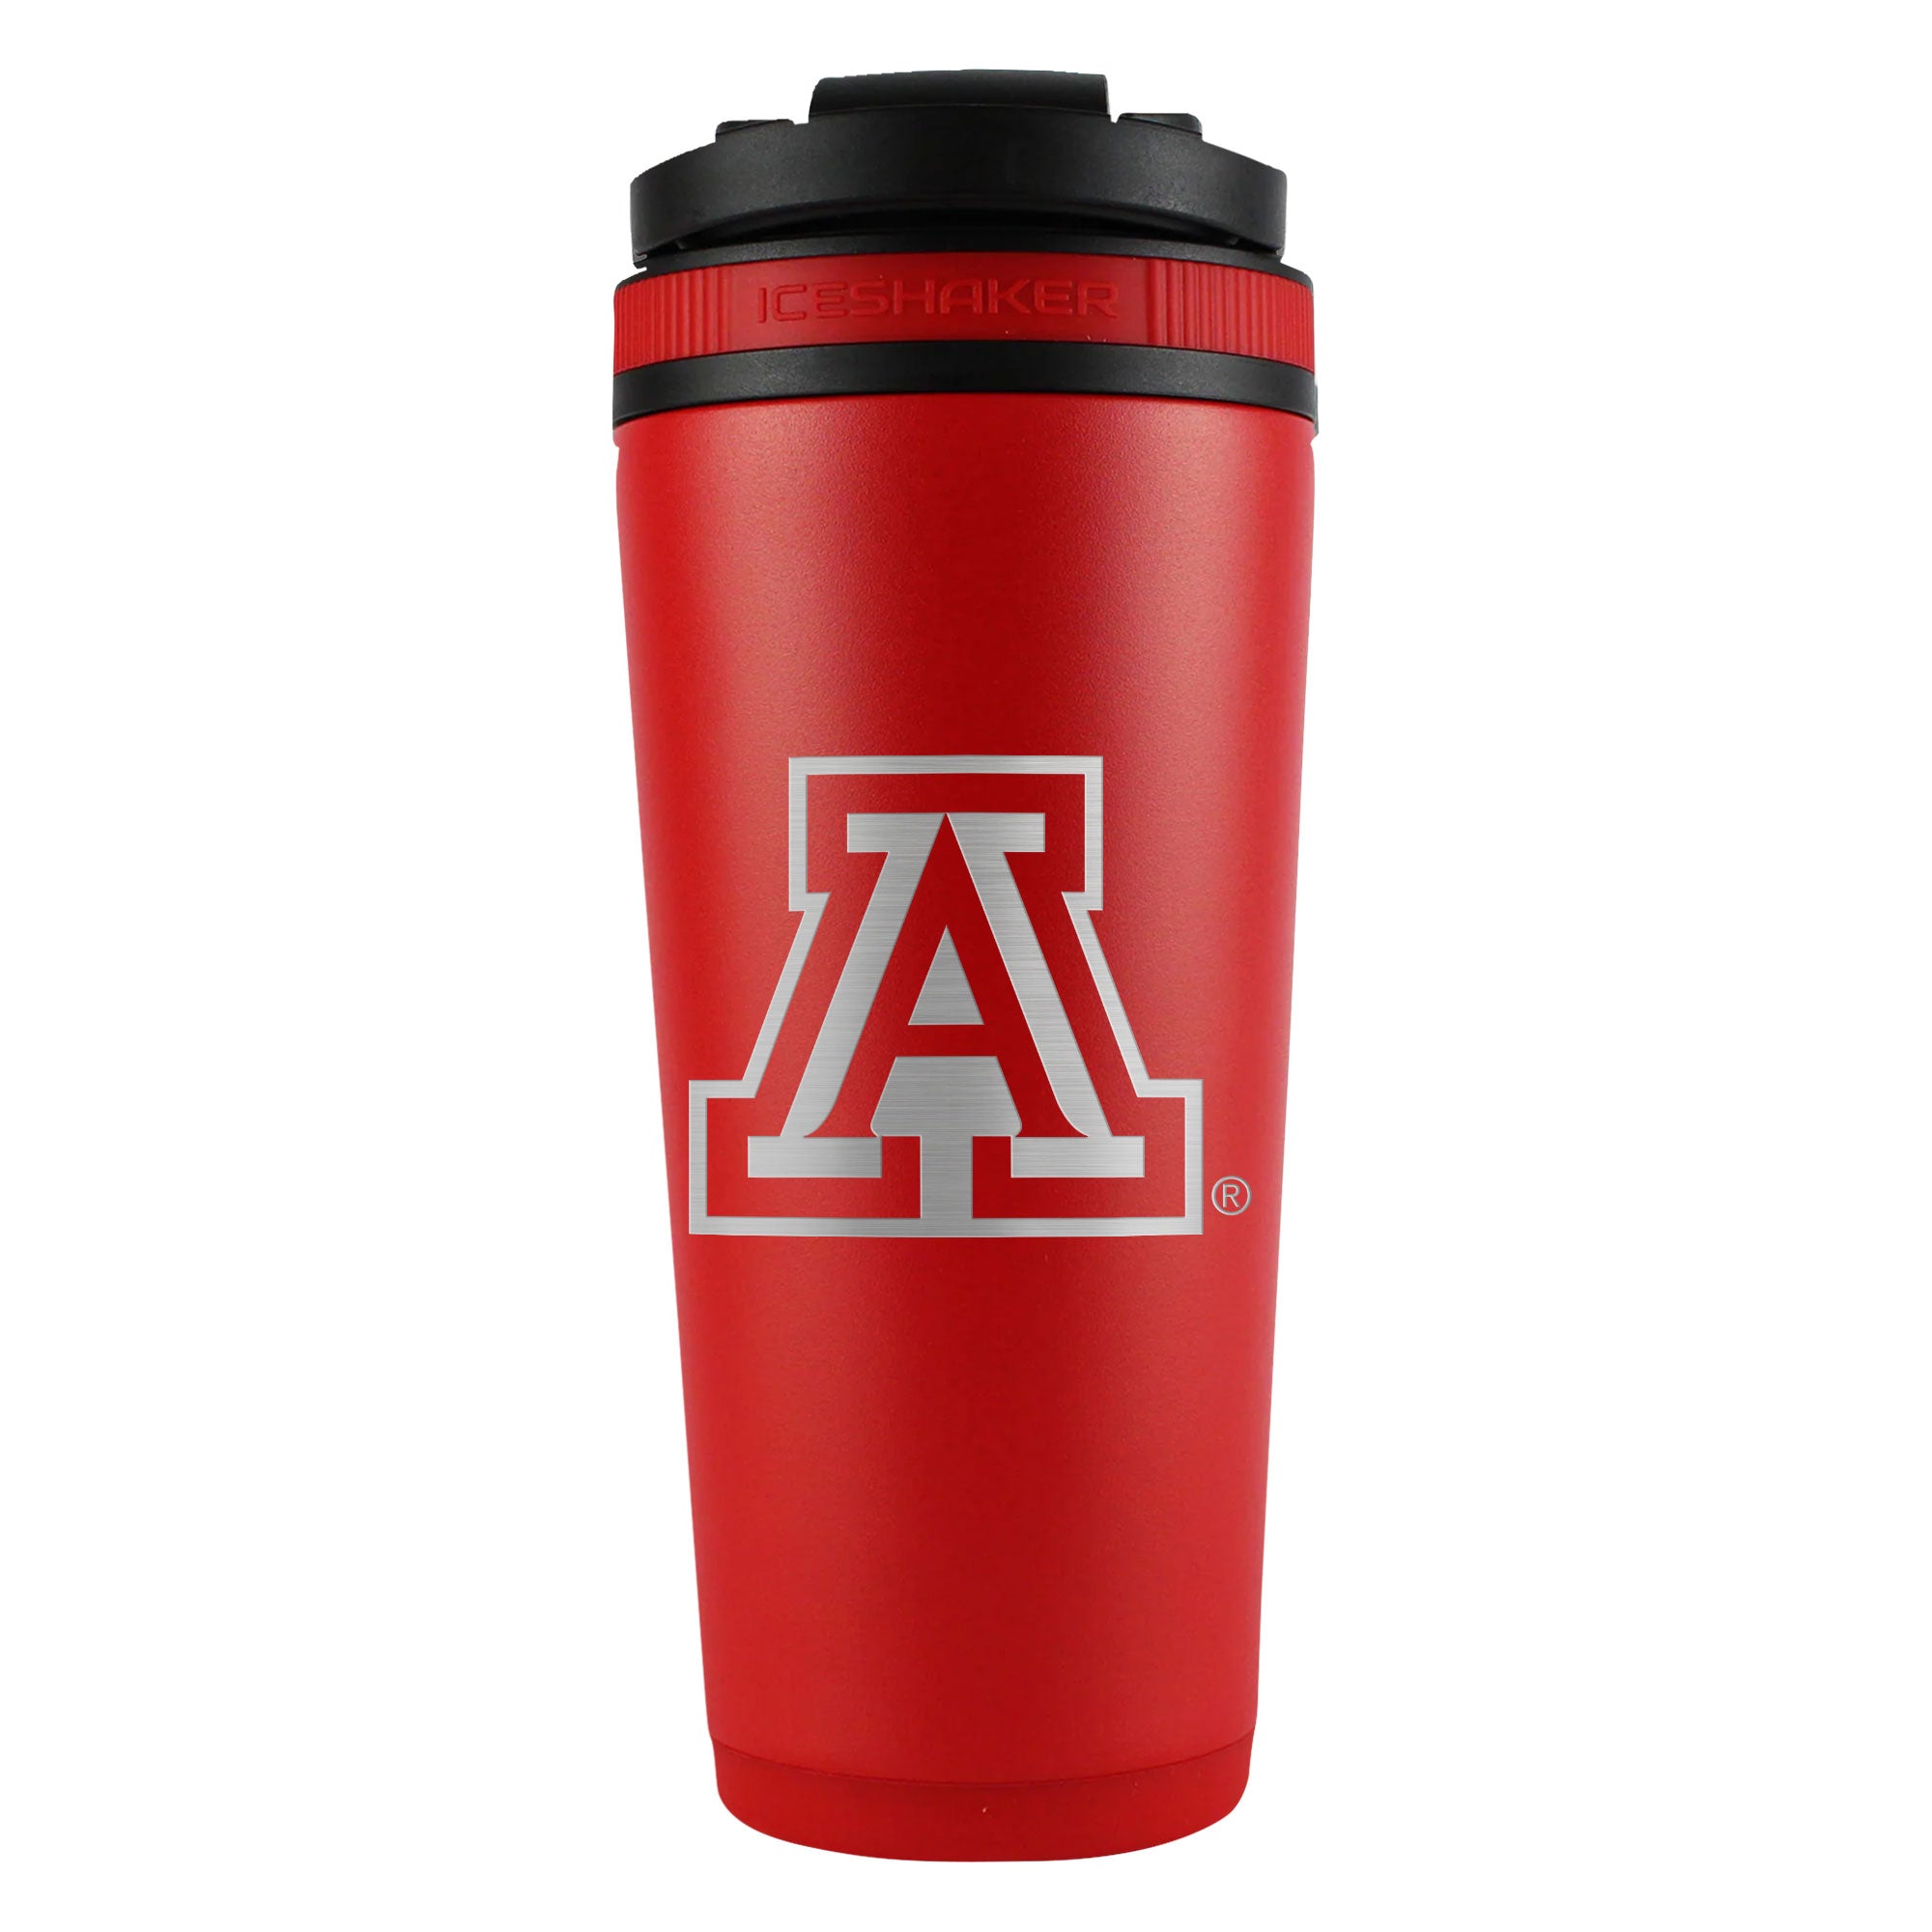 Officially Licensed University of Arizona 26oz Ice Shaker - Red